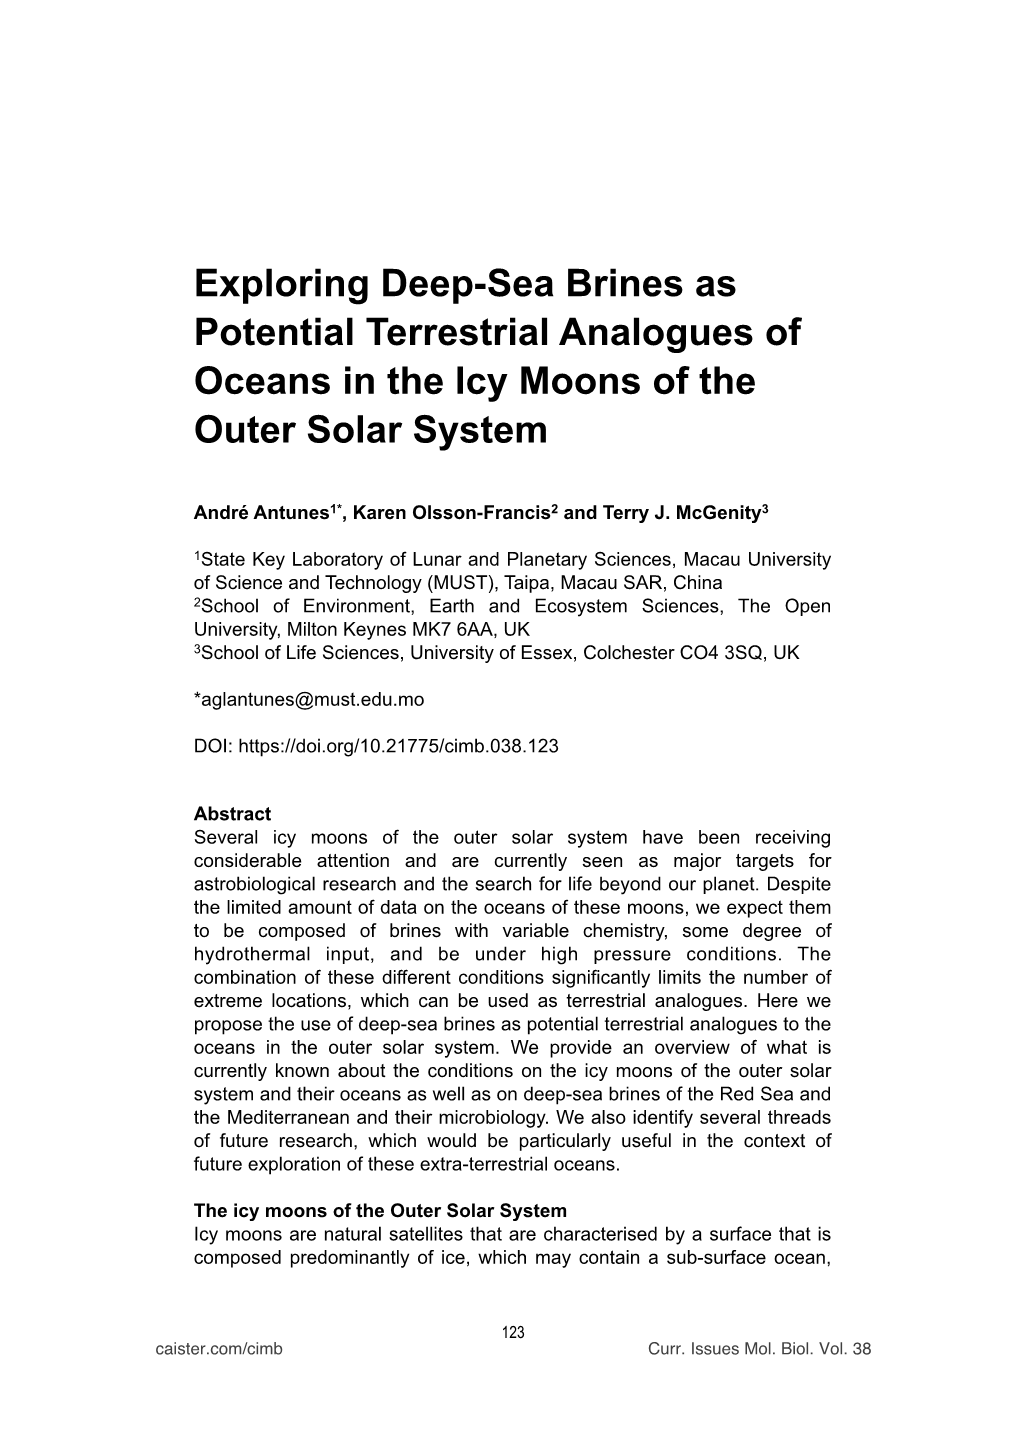 Exploring Deep-Sea Brines As Potential Terrestrial Analogues of Oceans in the Icy Moons of the Outer Solar System